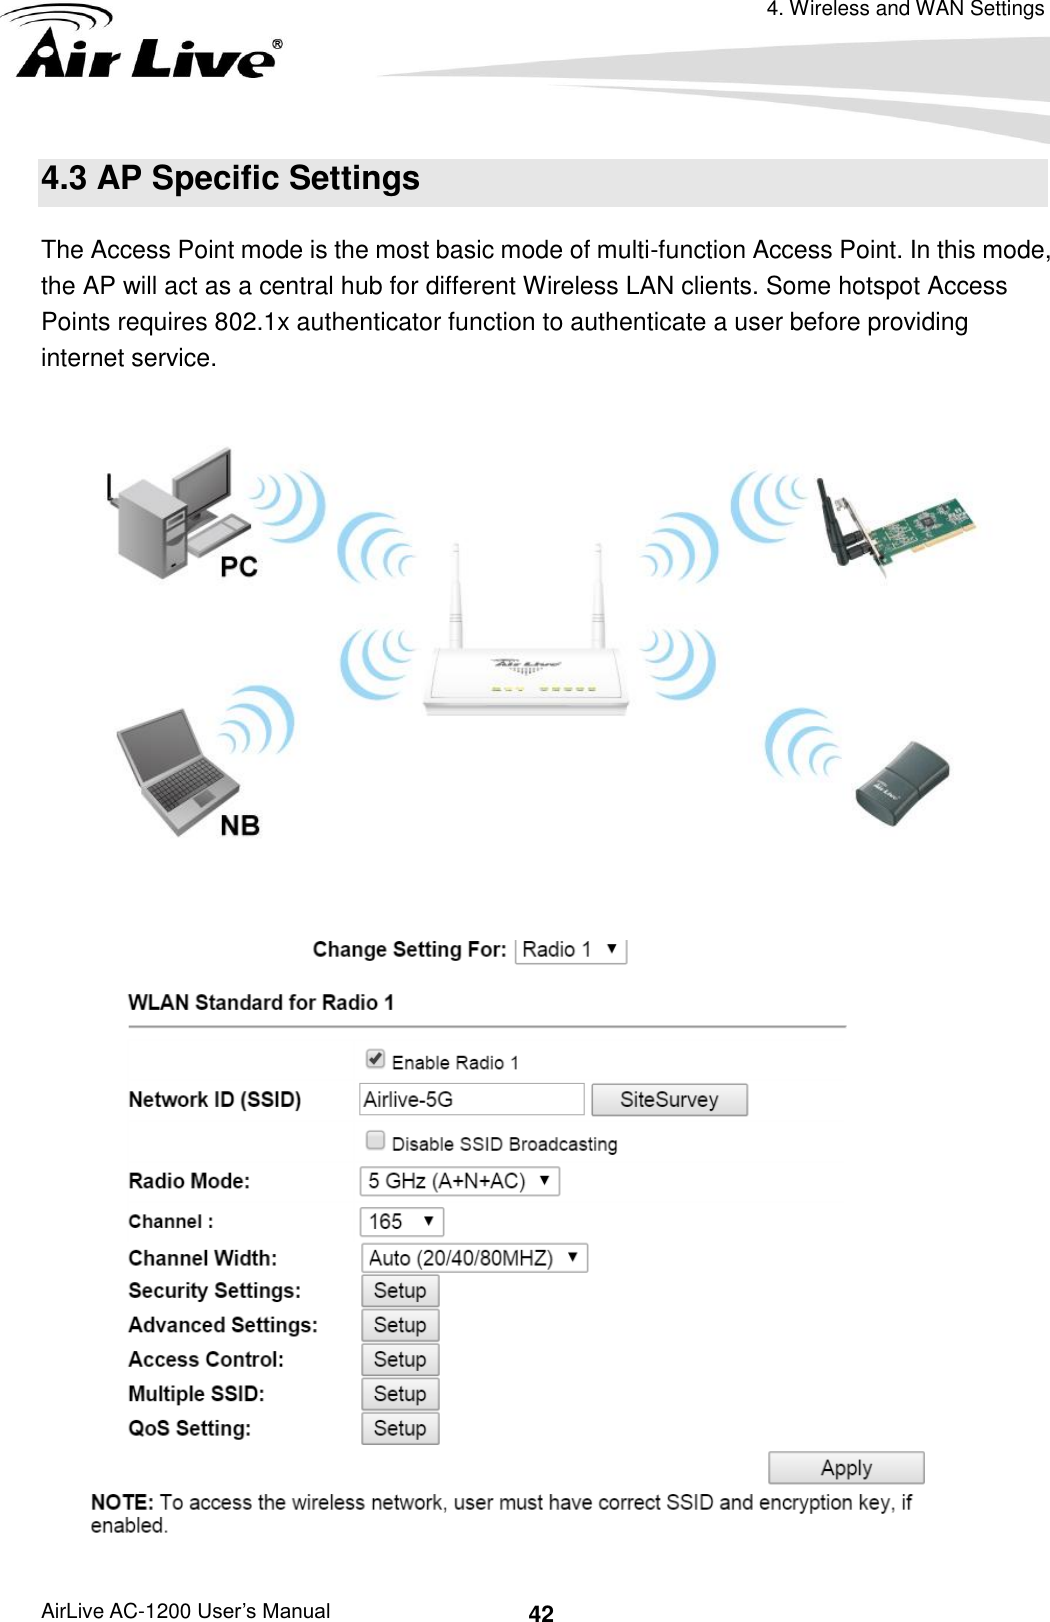 4. Wireless and WAN Settings AirLive AC-1200 User’s Manual 42 4.3 AP Specific Settings The Access Point mode is the most basic mode of multi-function Access Point. In this mode, the AP will act as a central hub for different Wireless LAN clients. Some hotspot Access Points requires 802.1x authenticator function to authenticate a user before providing internet service.    